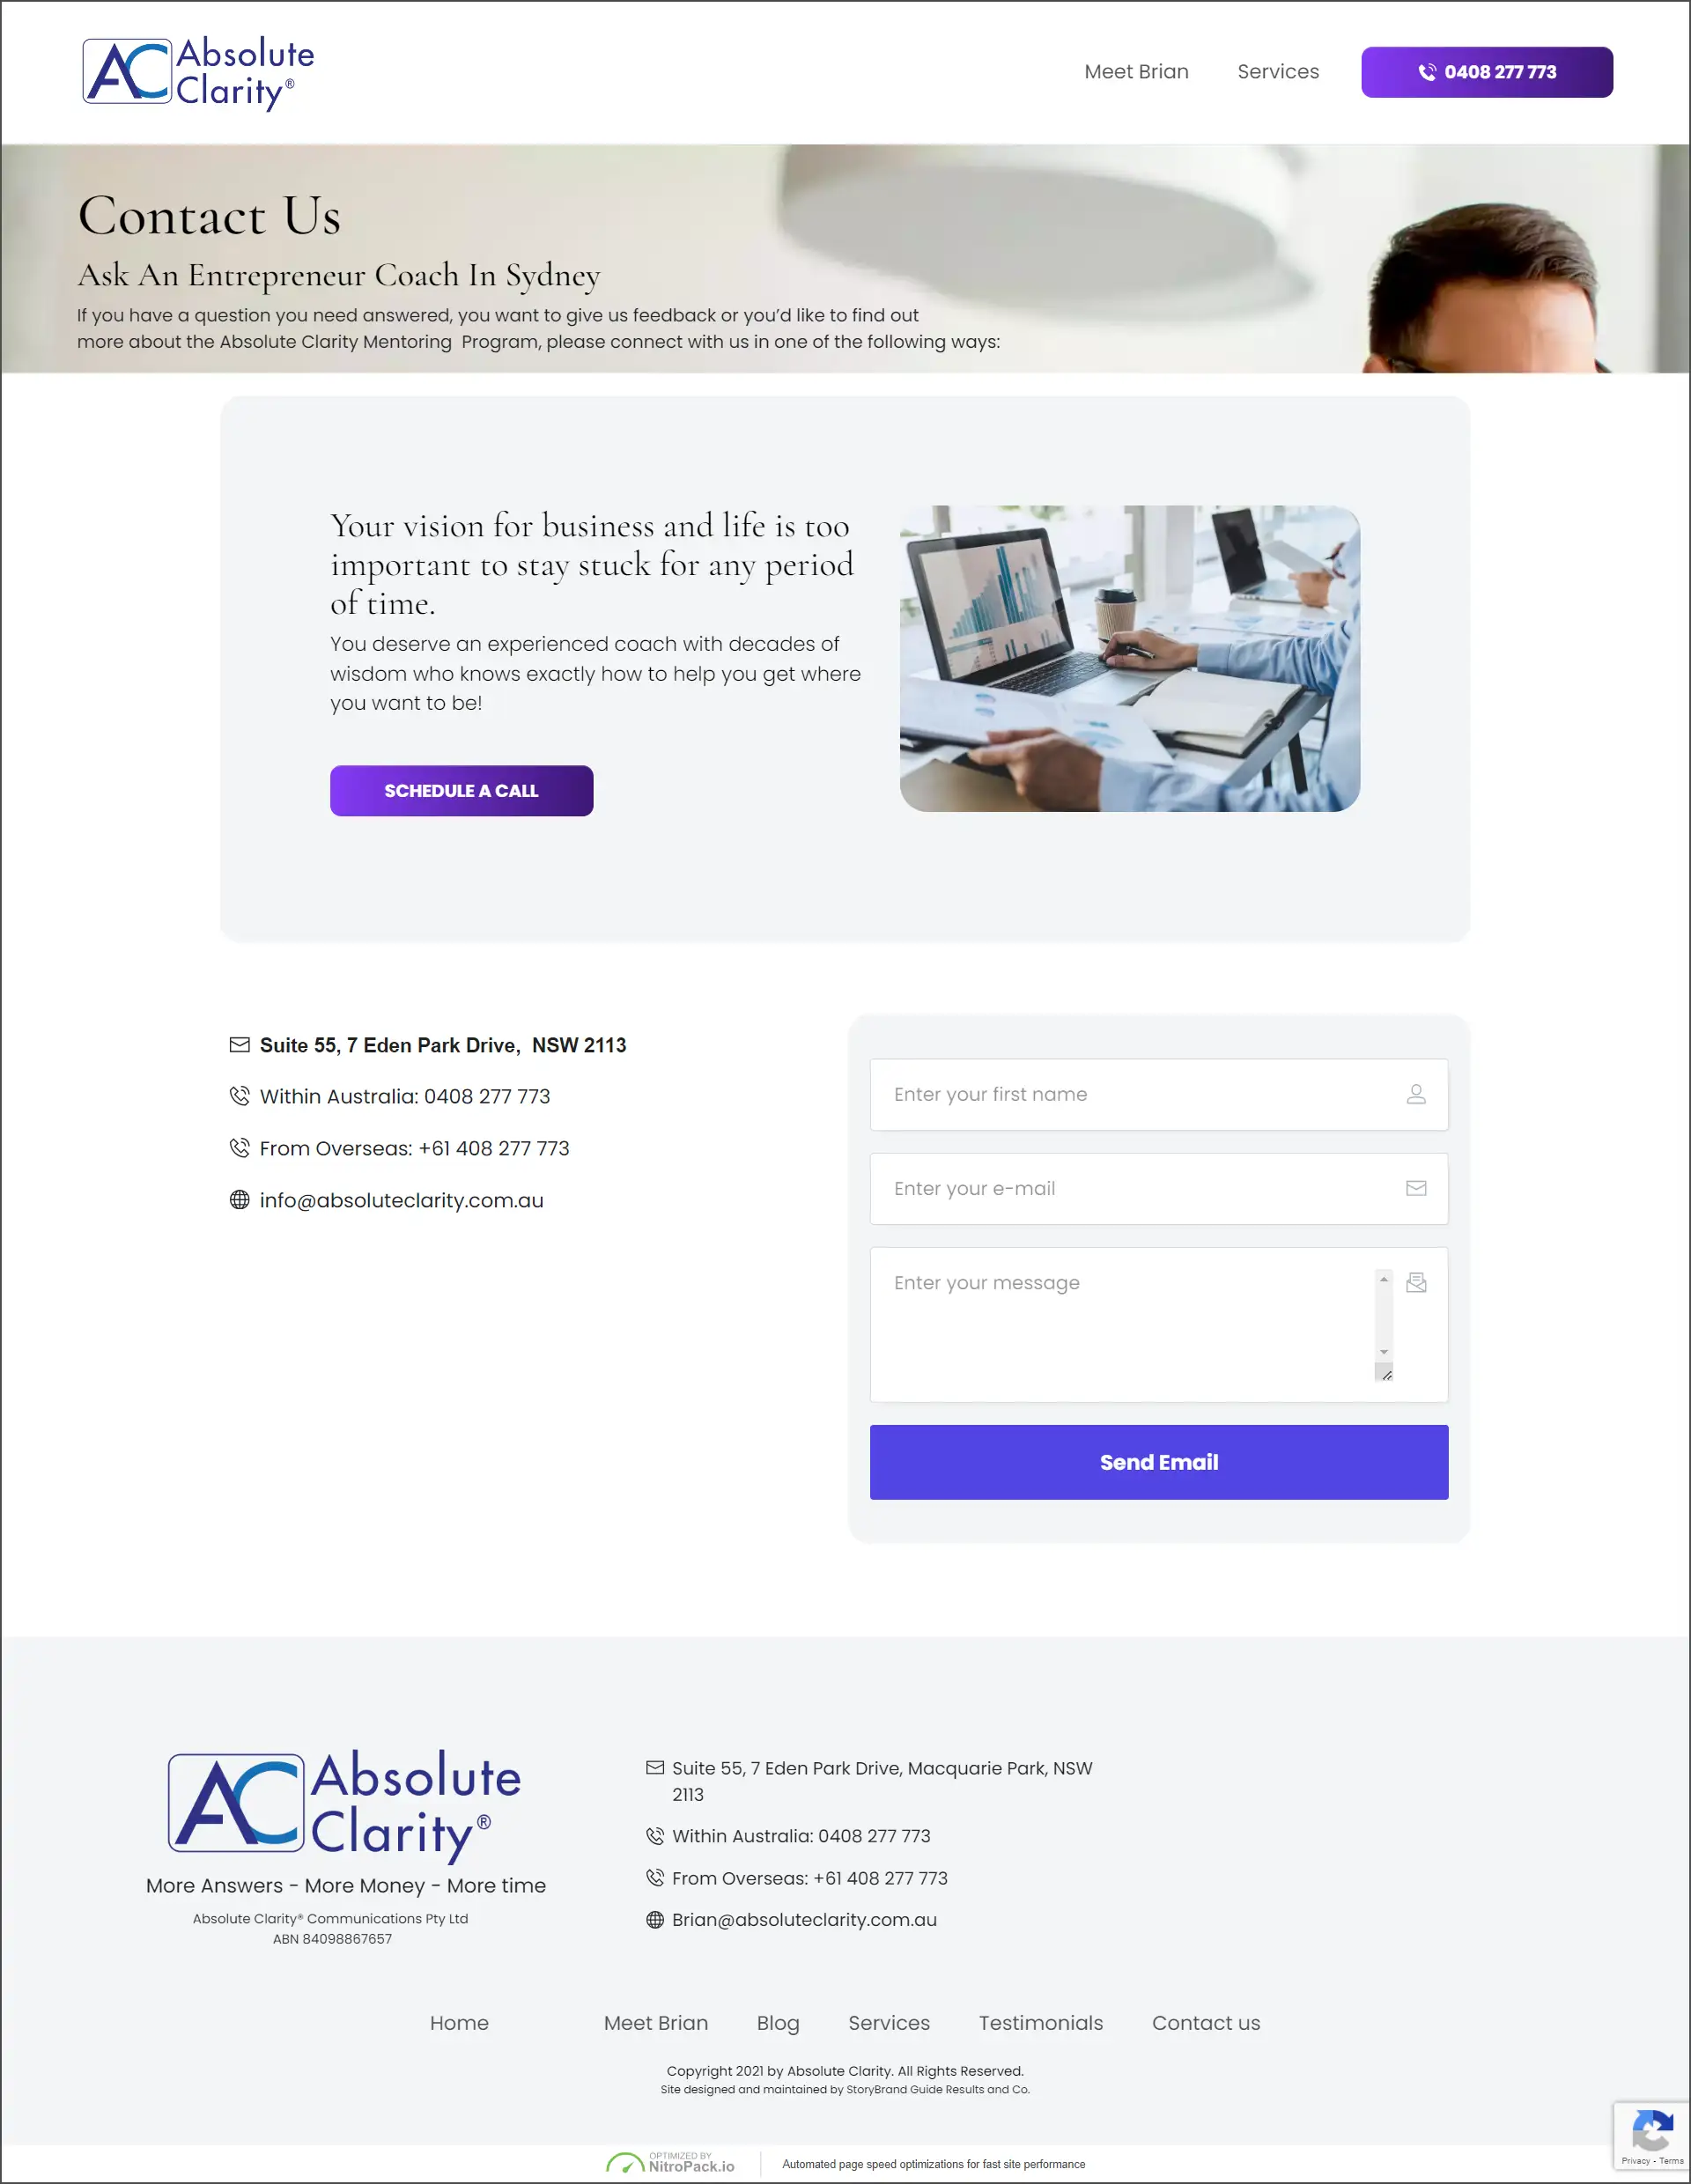 Absolute Clarity contact page